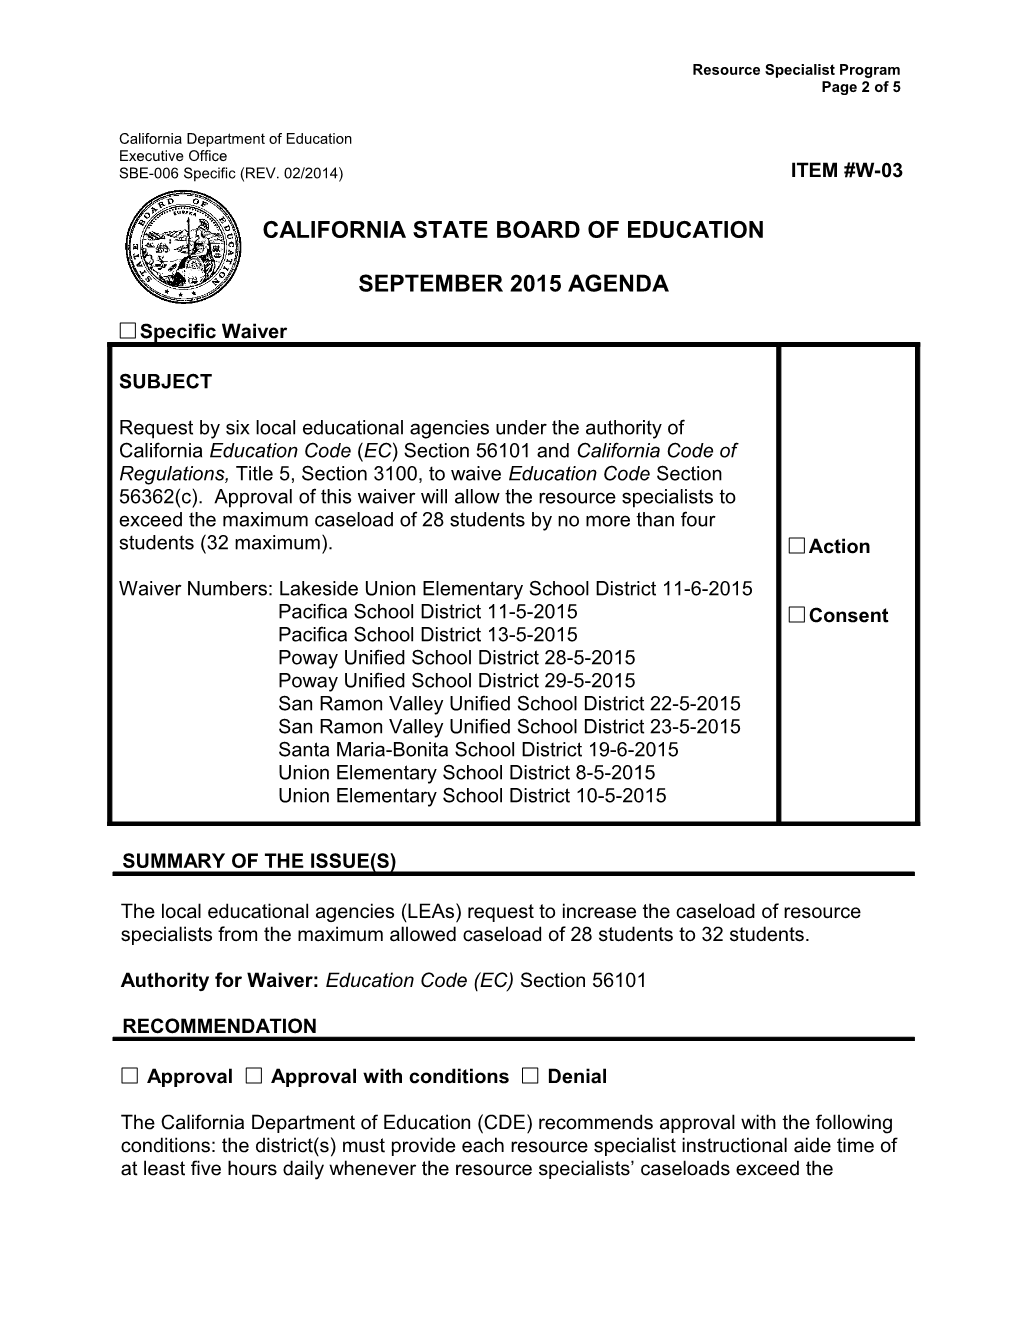 September 2015 Waiver Item W-03 - Meeting Agendas (CA State Board of Education)